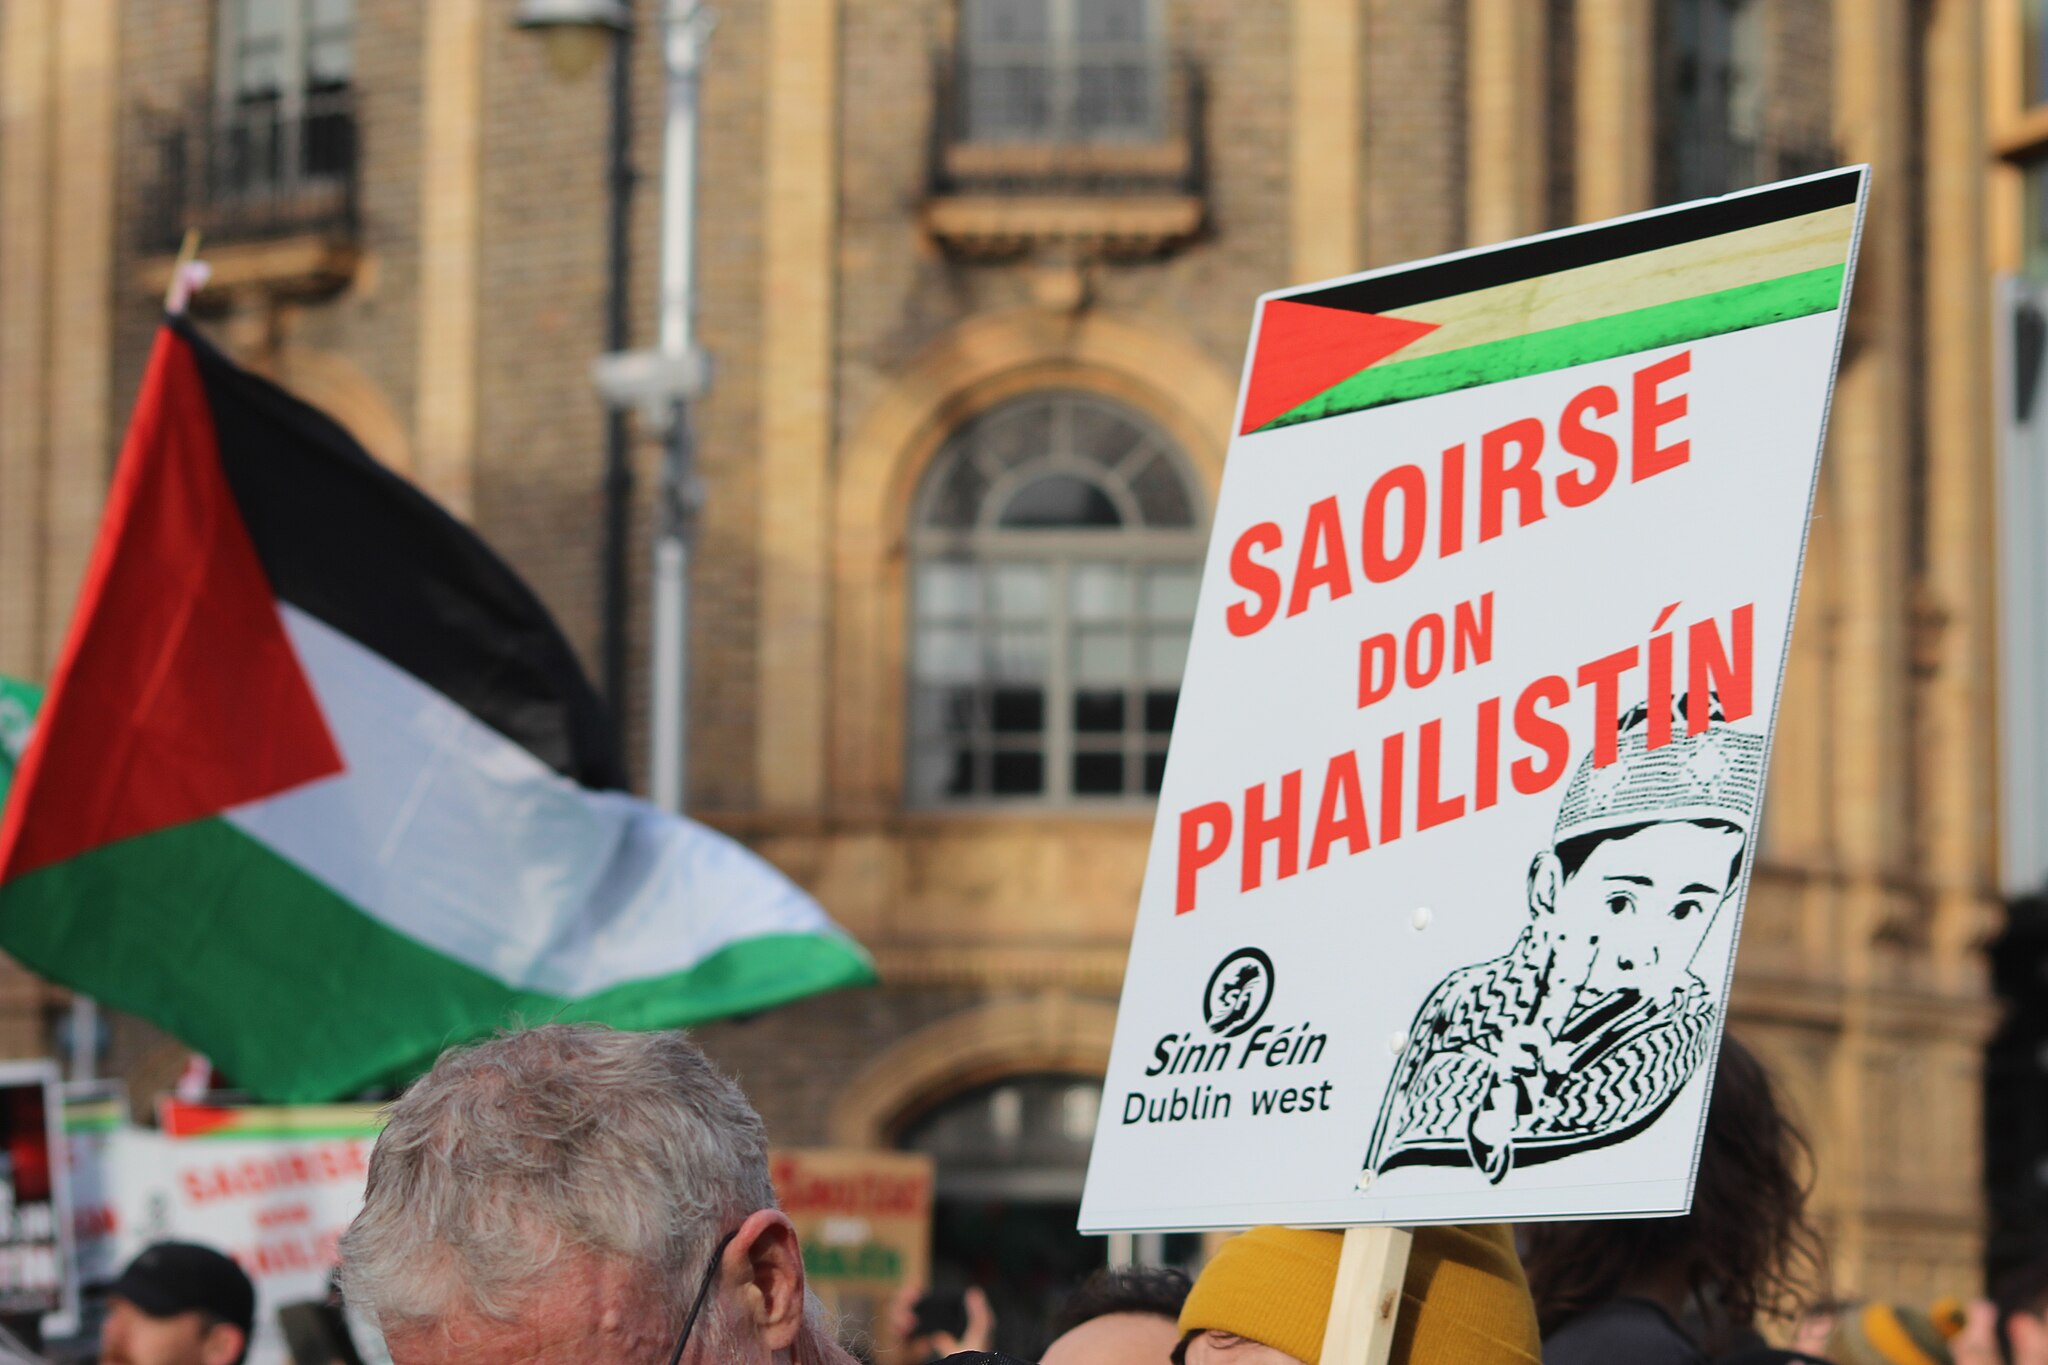 A sign at a rally in Ireland reading "Freedom for Palestine"